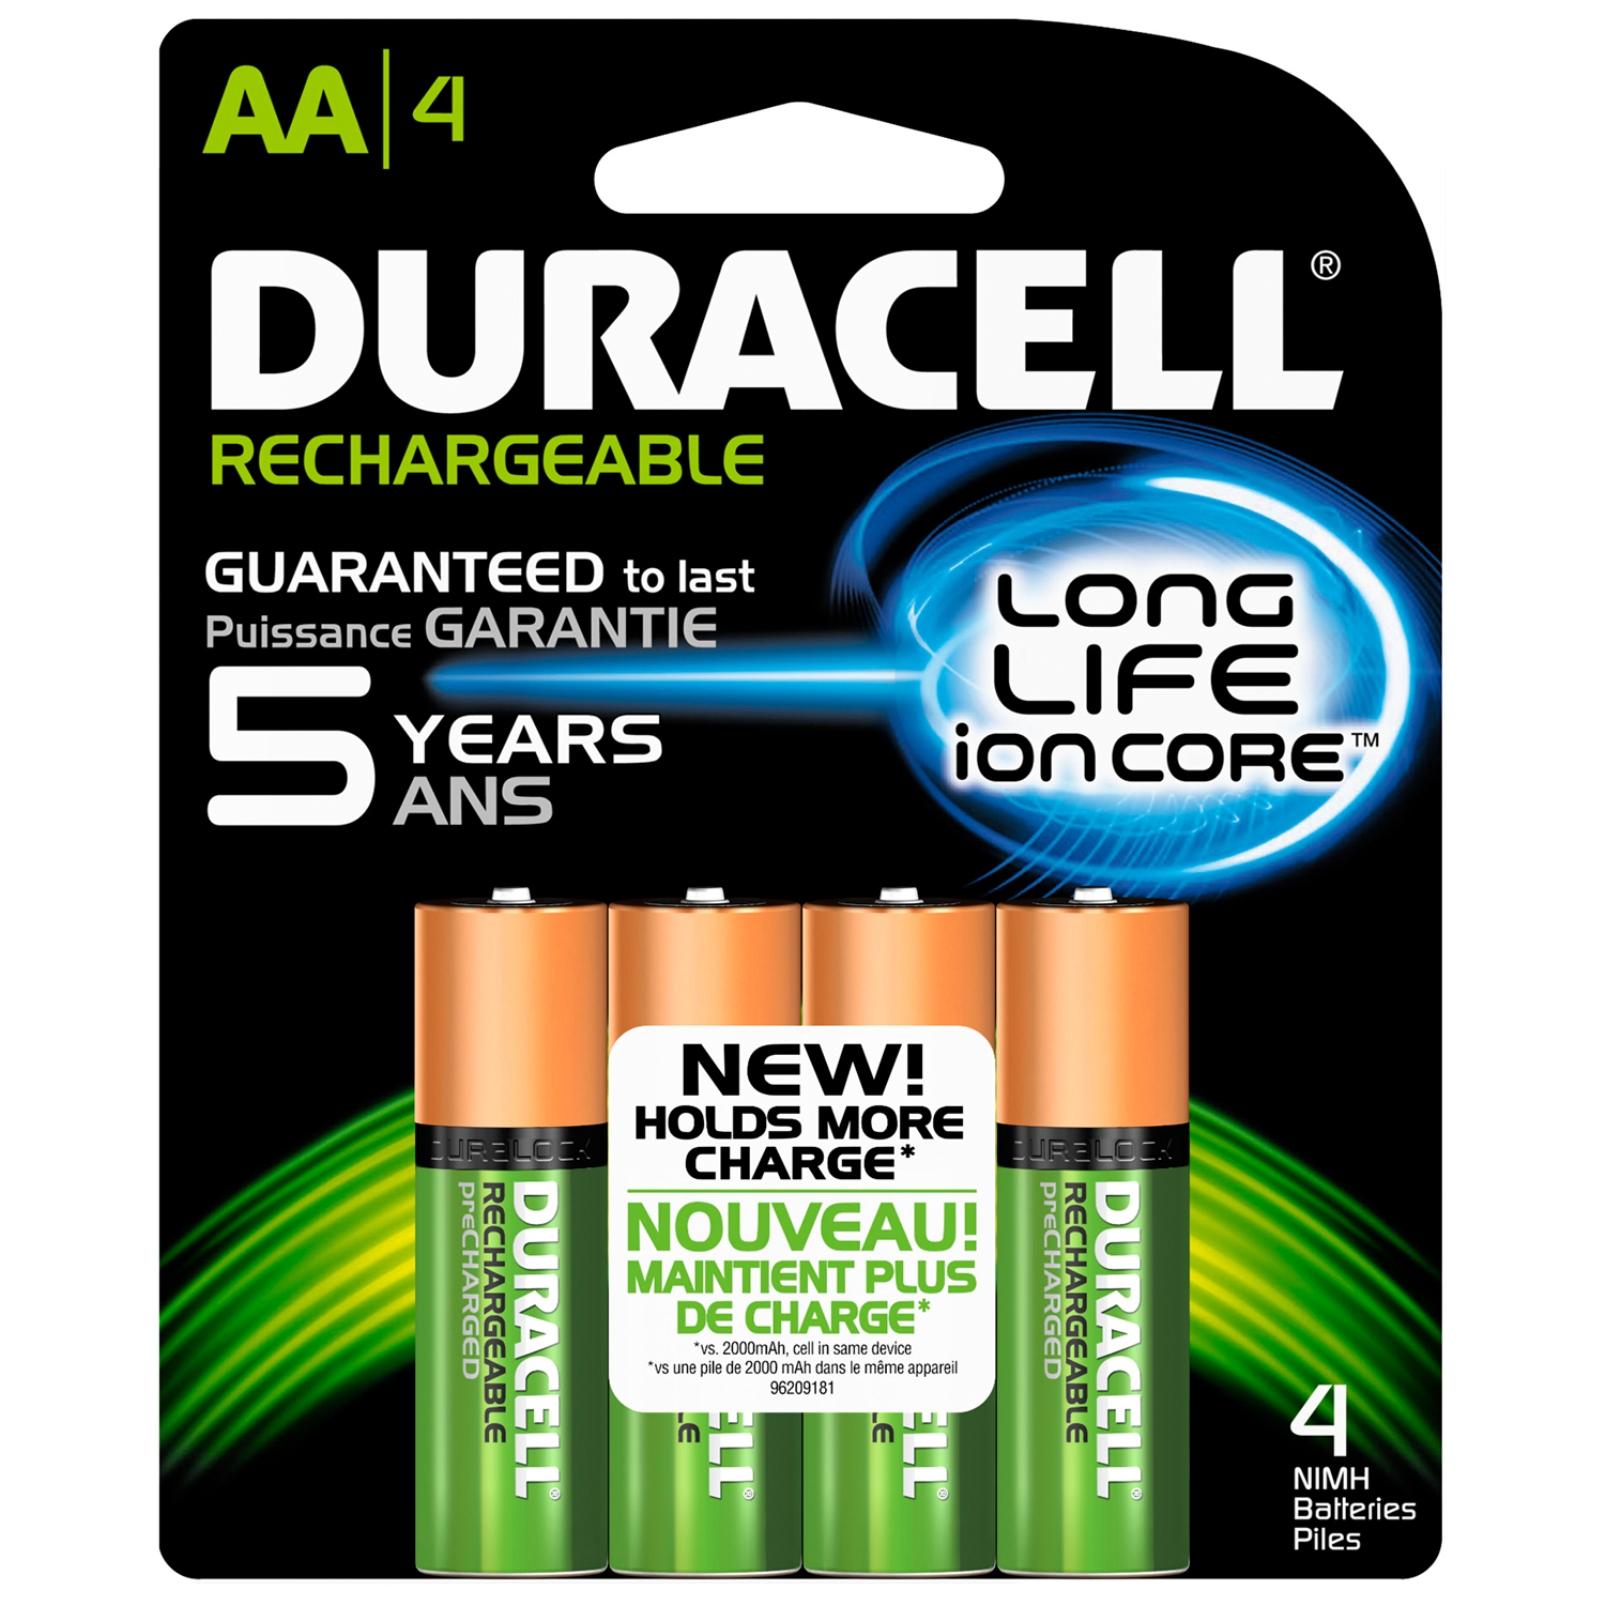 Duracell 66155 Batteries, NI-MH, Long Life Ion Core, AA, 4 ct